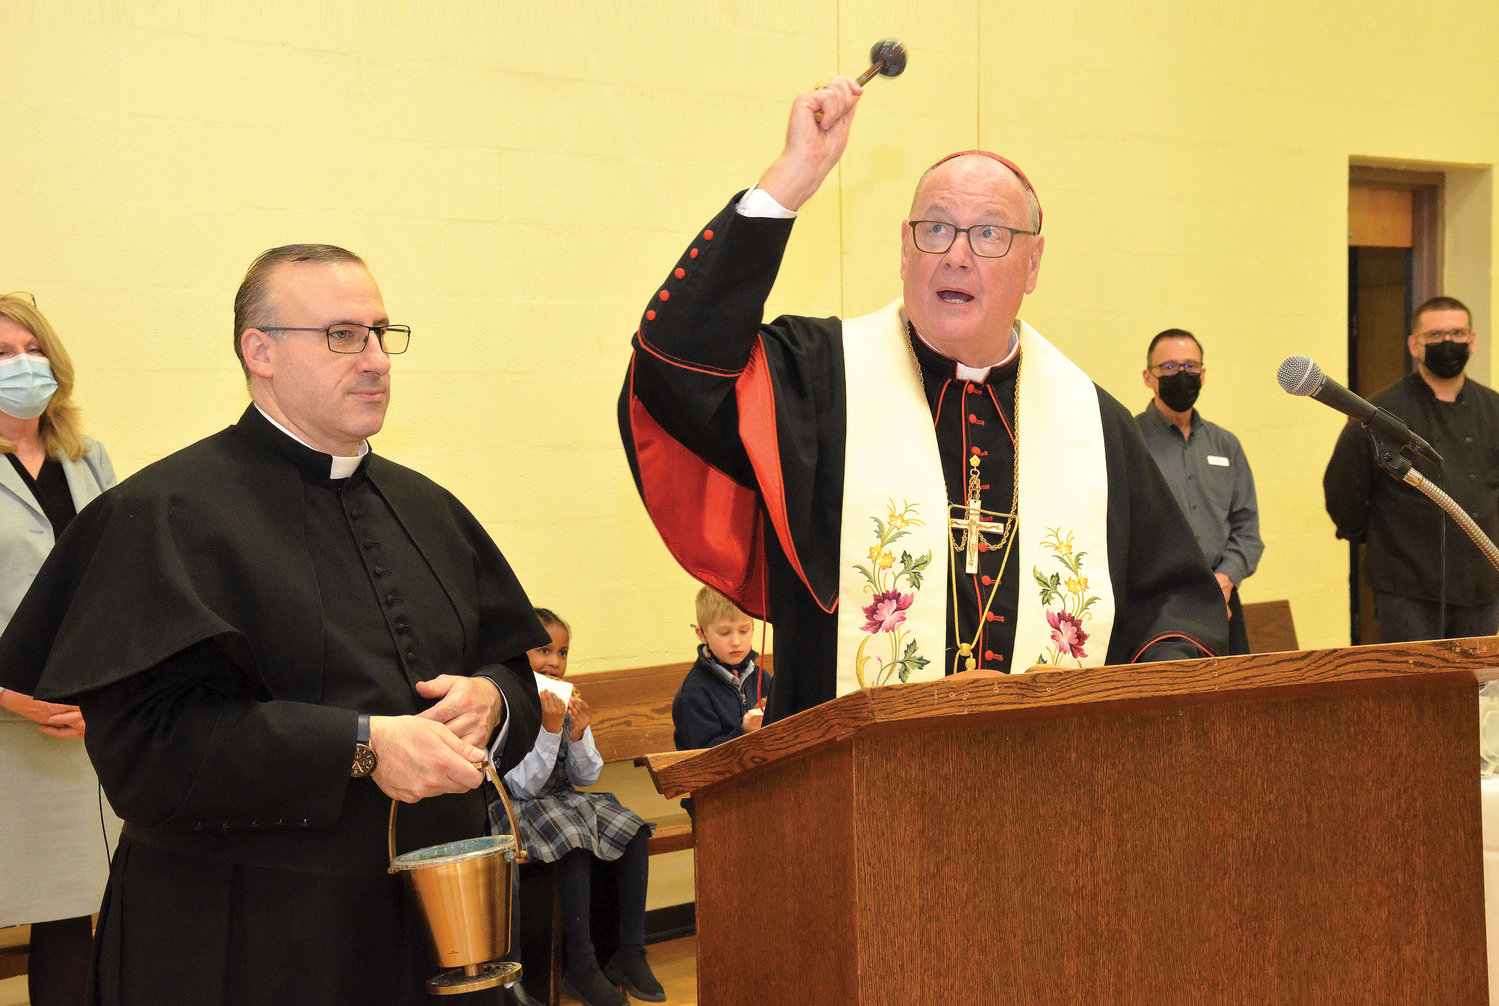 Cardinal Dolan blesses the Holy Trinity School Annex at St. Peter’s early childhood education center during Catholic Schools Week Feb. 3. Next to the cardinal is Father Anthony Mizzi-Gili, pastor of Holy Trinity parish. The annex houses Holy Trinity’s universal prekindergarten program and first grade and kindergarten students.